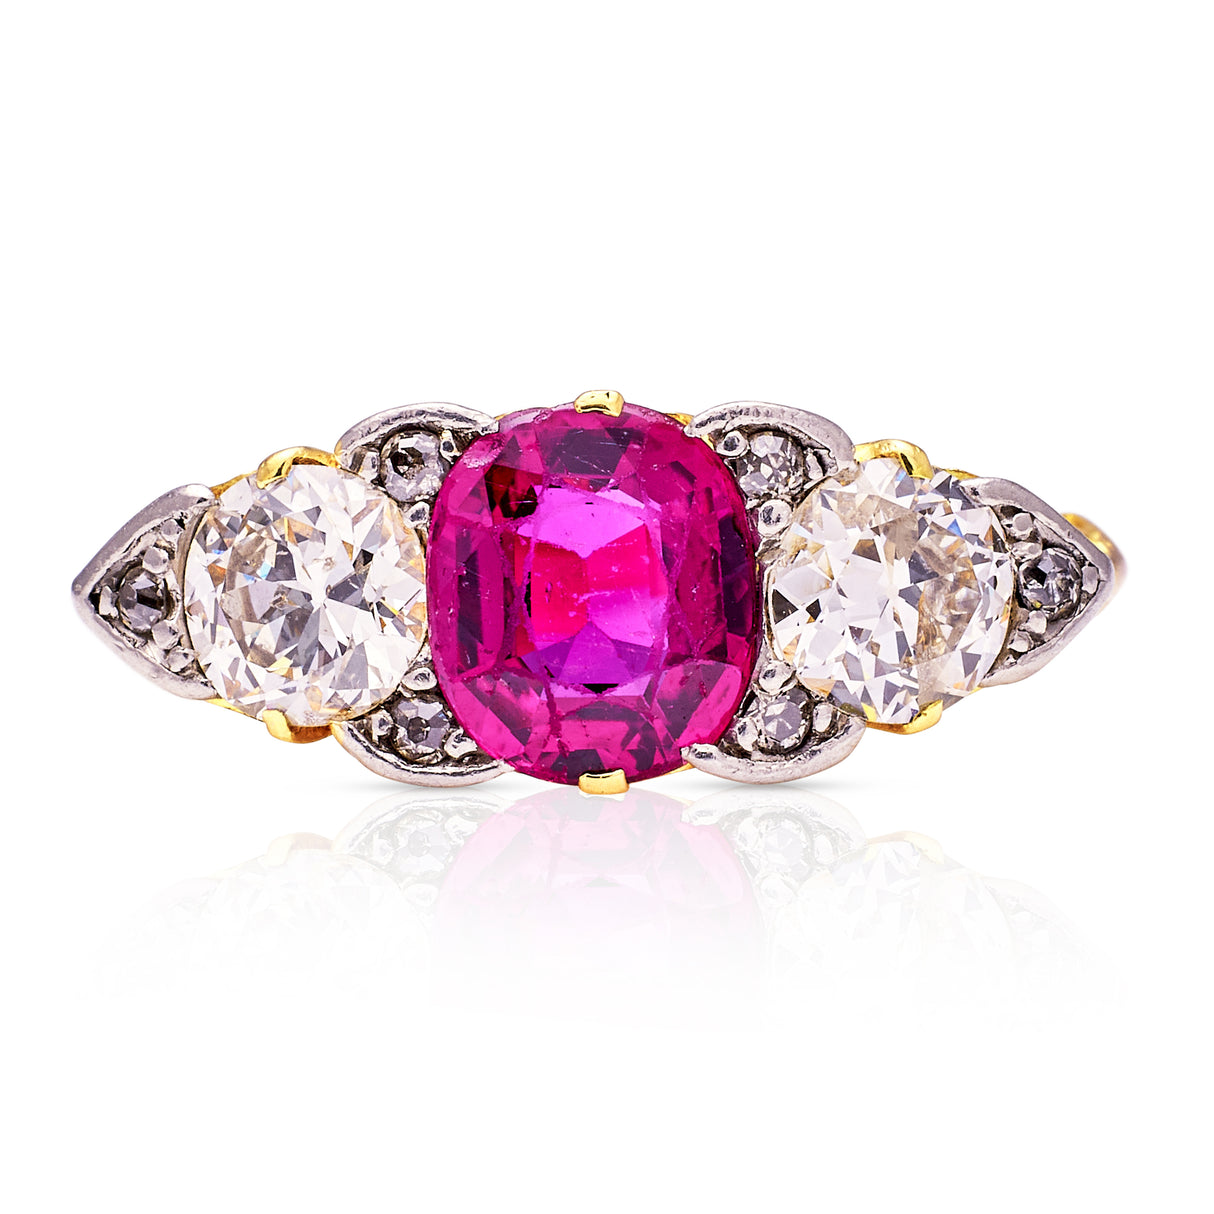 Antique, Edwardian Three Stone Natural Ruby and Diamond Engagement Ring, 18ct Yellow Gold front view